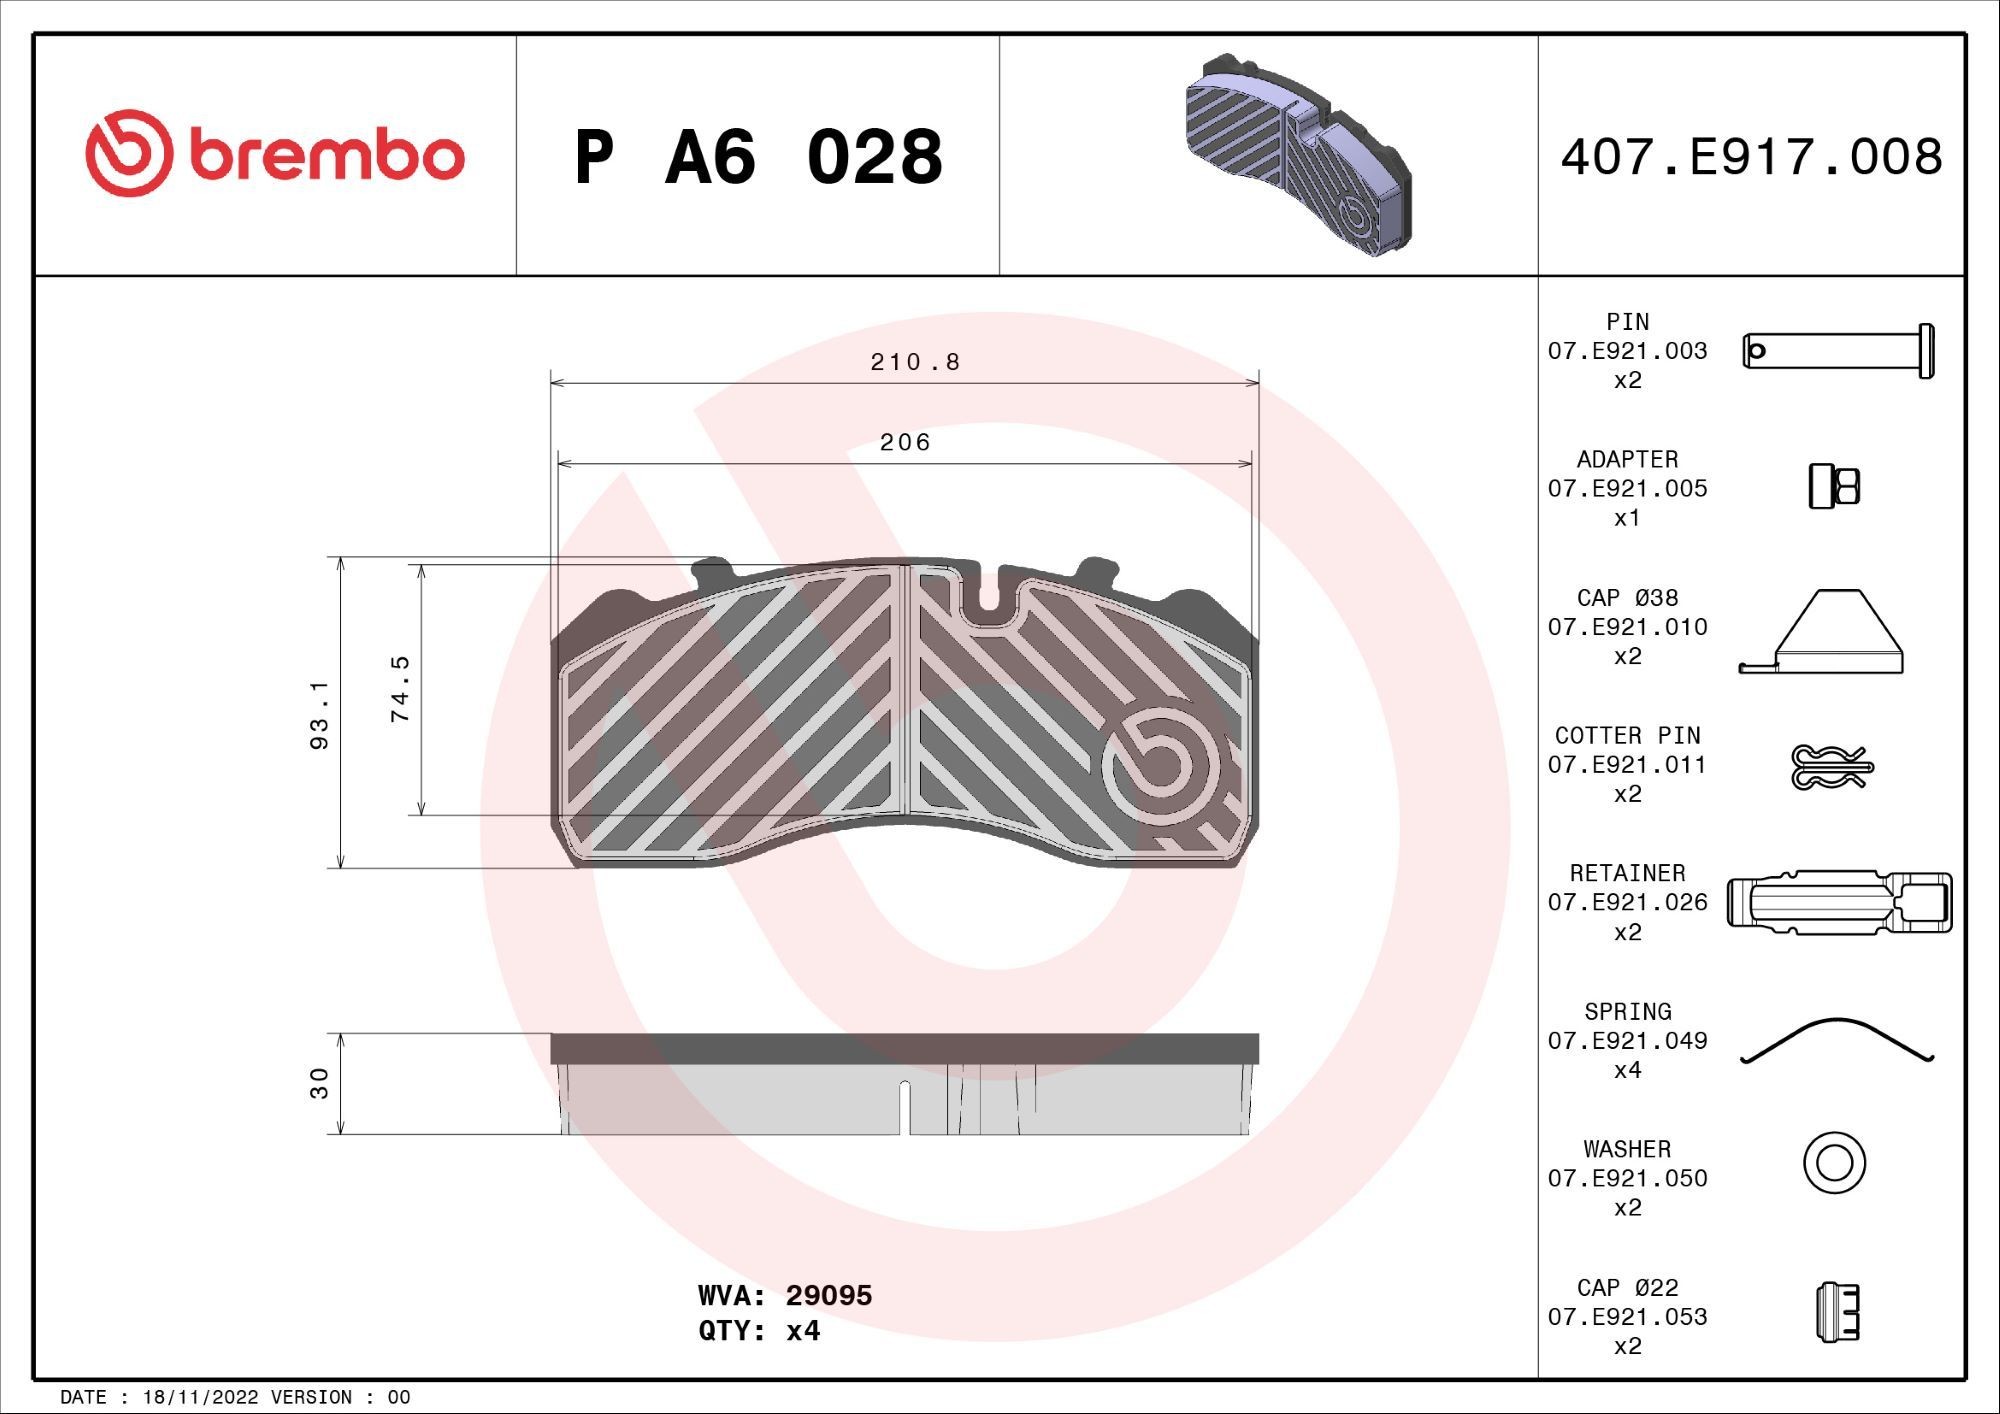 BREMBO P A6 028 Brake pad set prepared for wear indicator, with accessories